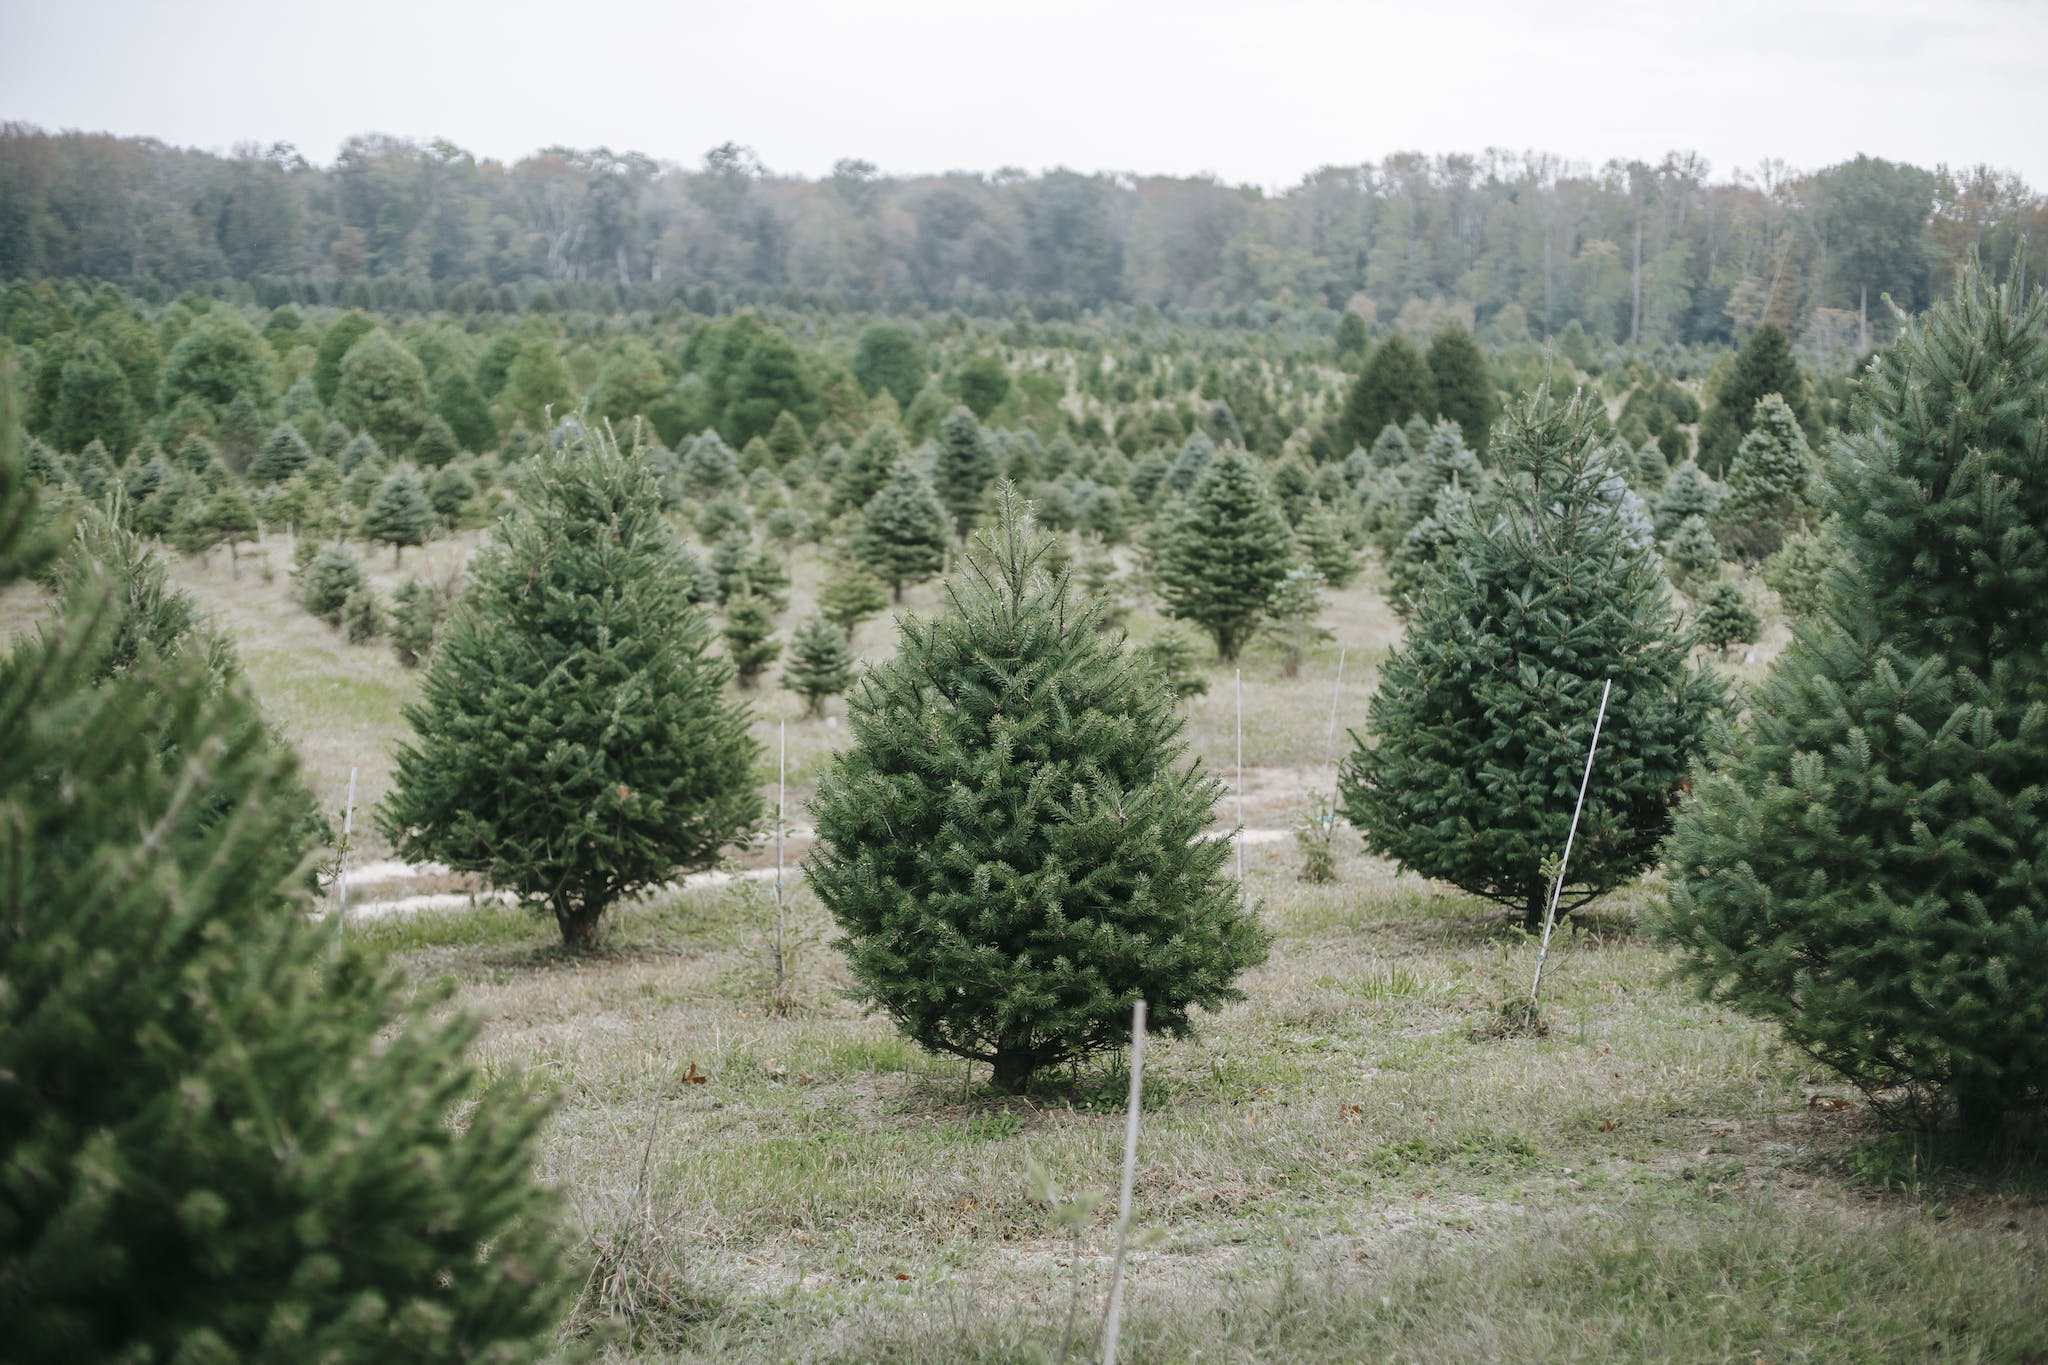 Tree farm with growing pine spruce and fir trees cultivating for Christmas holidays